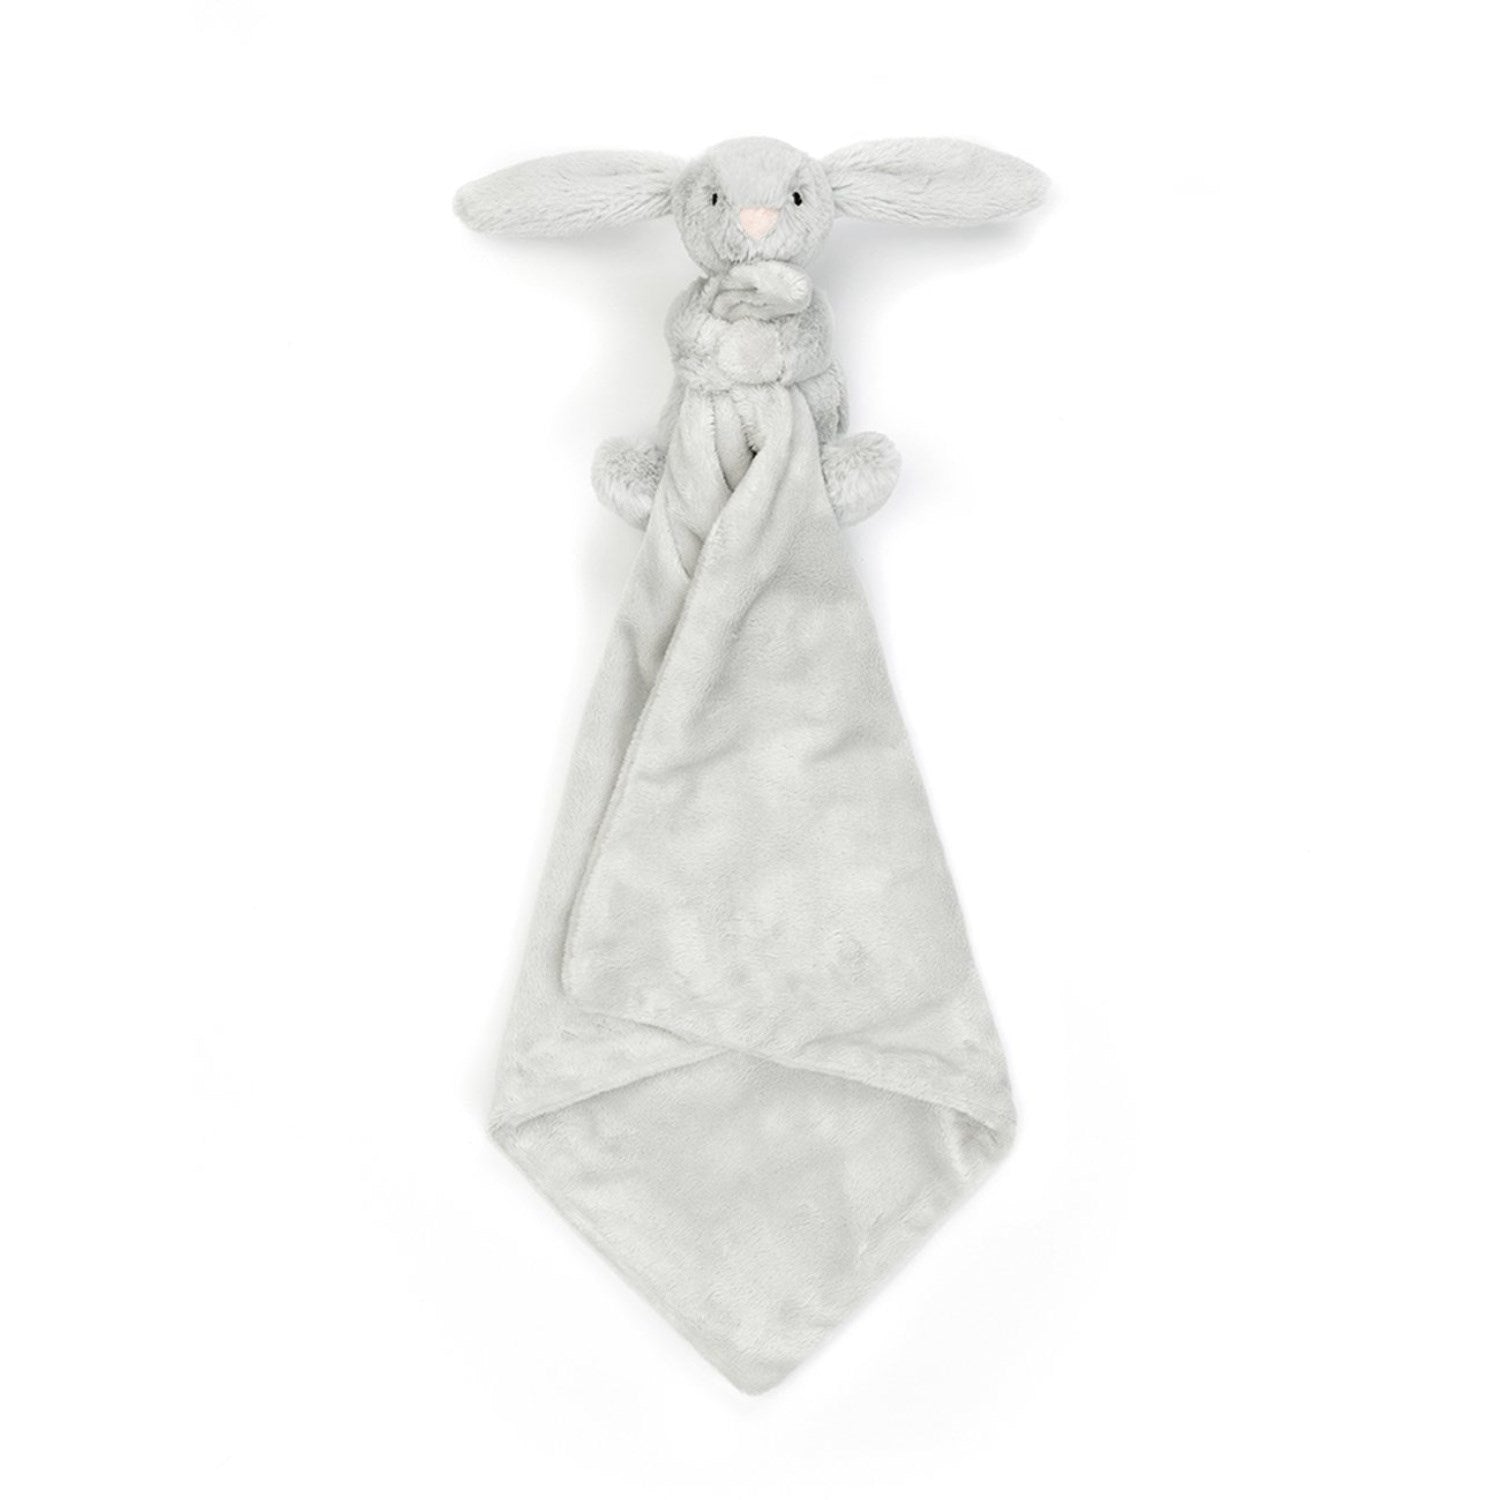 Jellycat Bashful Silver Bunny Soother 2